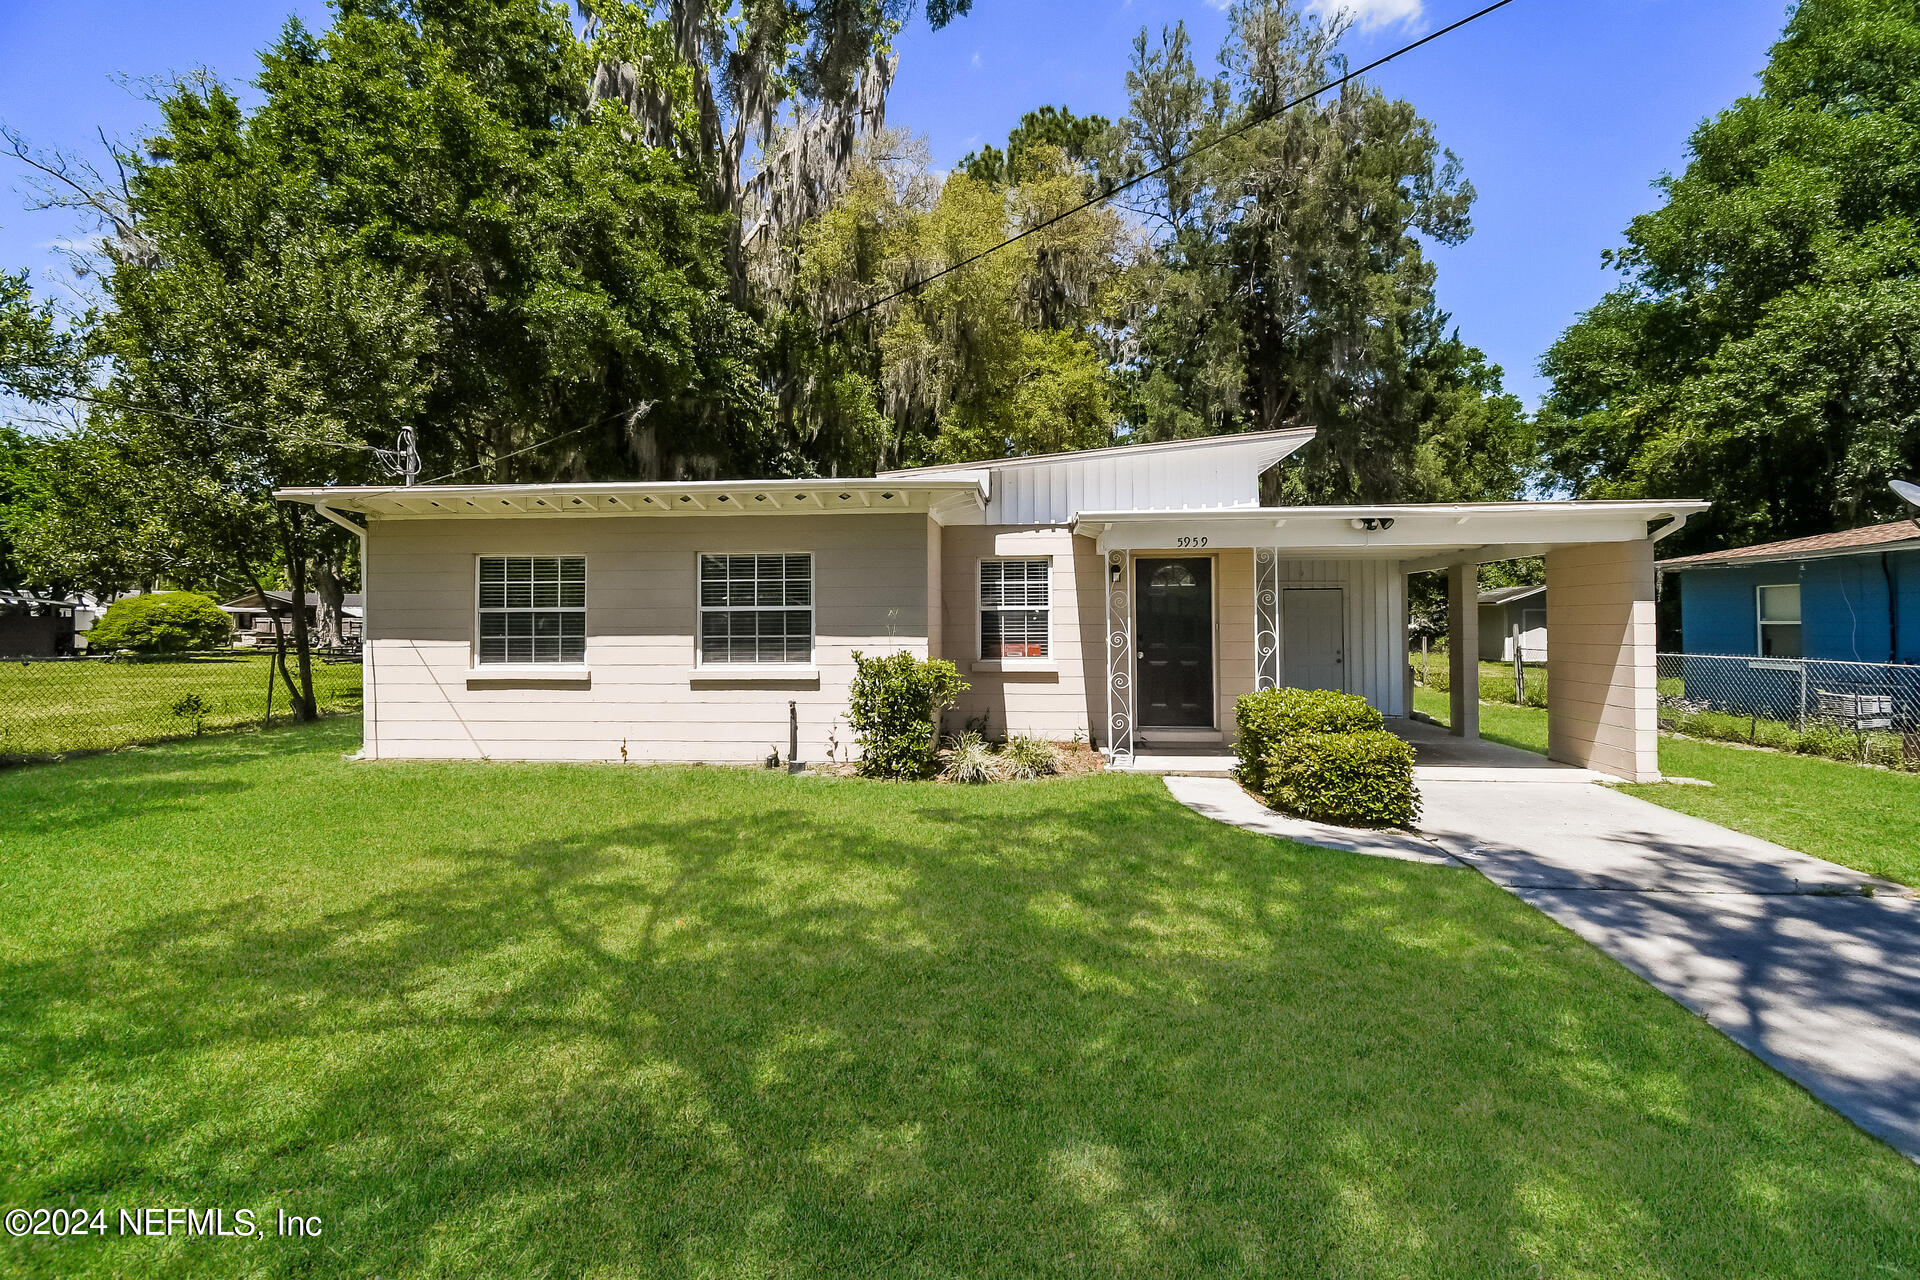 Jacksonville, FL home for sale located at 5959 110th Street, Jacksonville, FL 32244